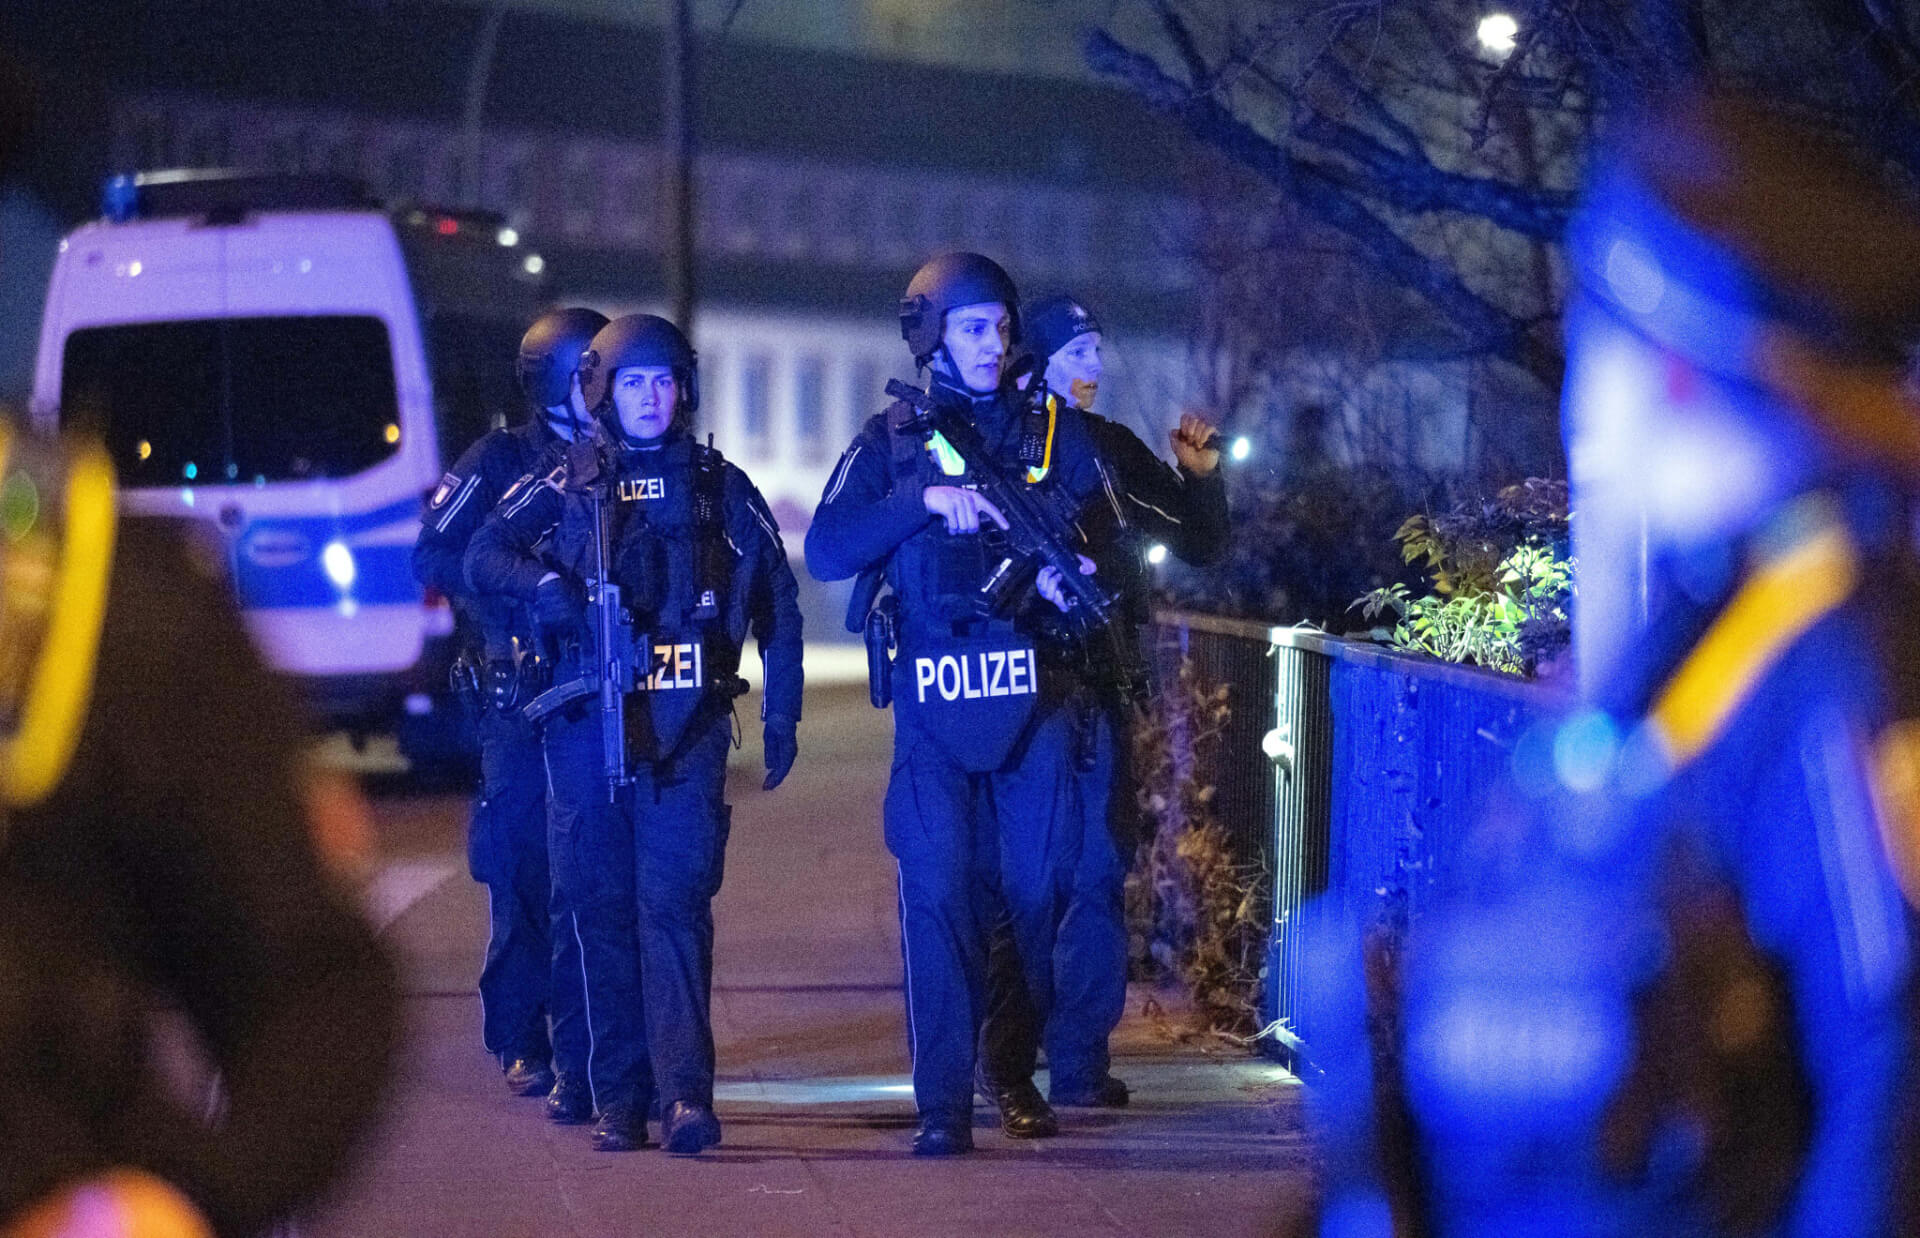 7 Dead, 25 Injured in Shooting at Jehovah’s Witness Hall in Germany